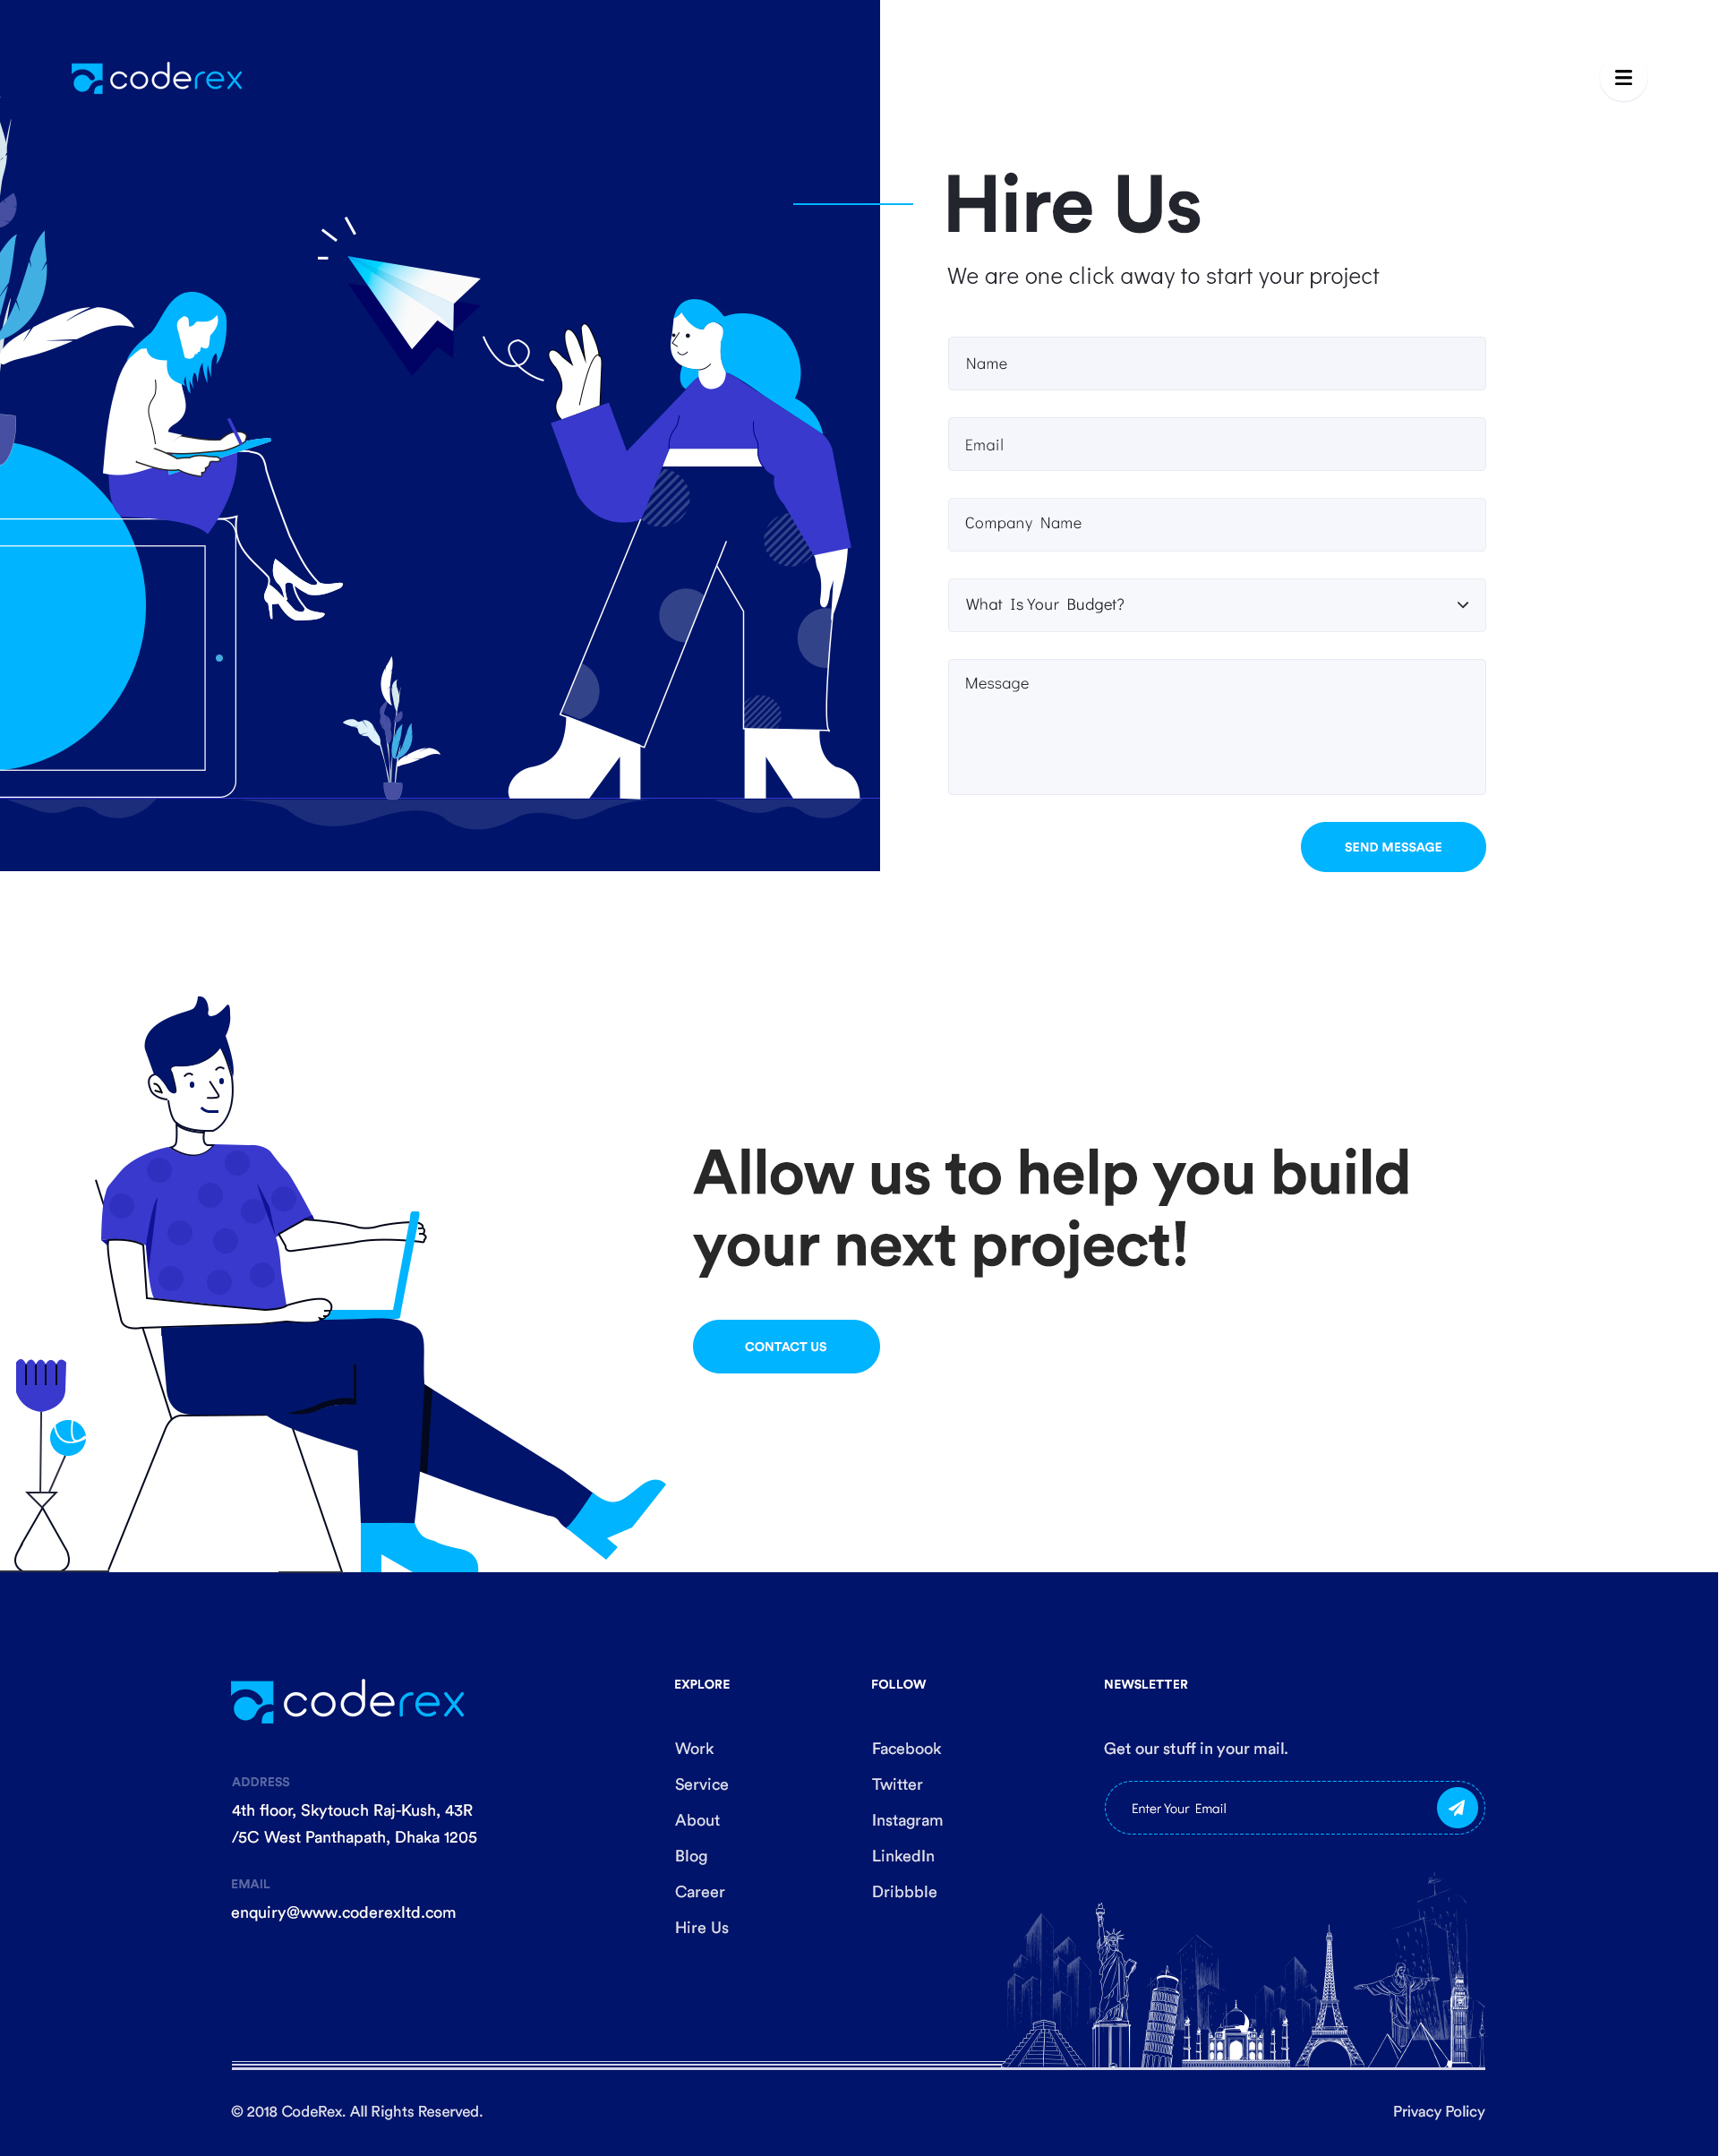 contact-us-page-illustration-by-code-rex-on-dribbble